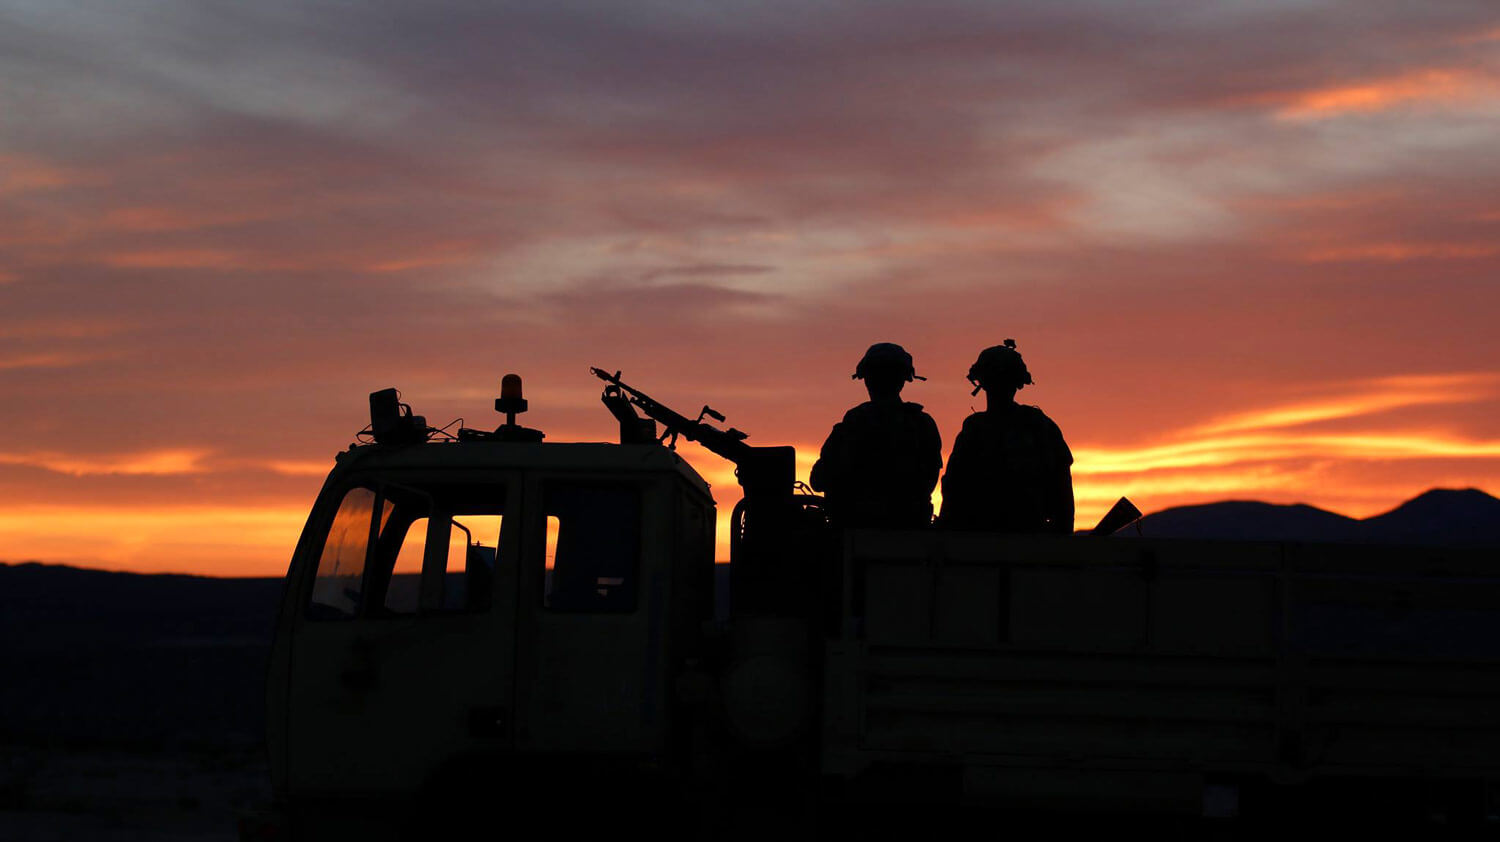 SGT Seamus Redmond and SPC Joseph Page, members of Task Force Ragnar, stand guard during a rotation at the National Training Center in Fort Irwin, California, May 8, 2018. Led by the Minnesota Army National Guard, Task Force Ragnar is made up by Soldiers from Utah-based B Company, 1st Battalion, 211th Assault Reconnaissance Battalion; Nevada-based B Company, 1-189th General Support Aviation Battalion; Michigan-based C Company, 3-238th GSAB; and Minnesota-based A, D, E and Headquarters Companies, 2-147th AHB and F Company, 1-189th GSAB. Minnesota Army National Guard photo by CPT Katherine Zins